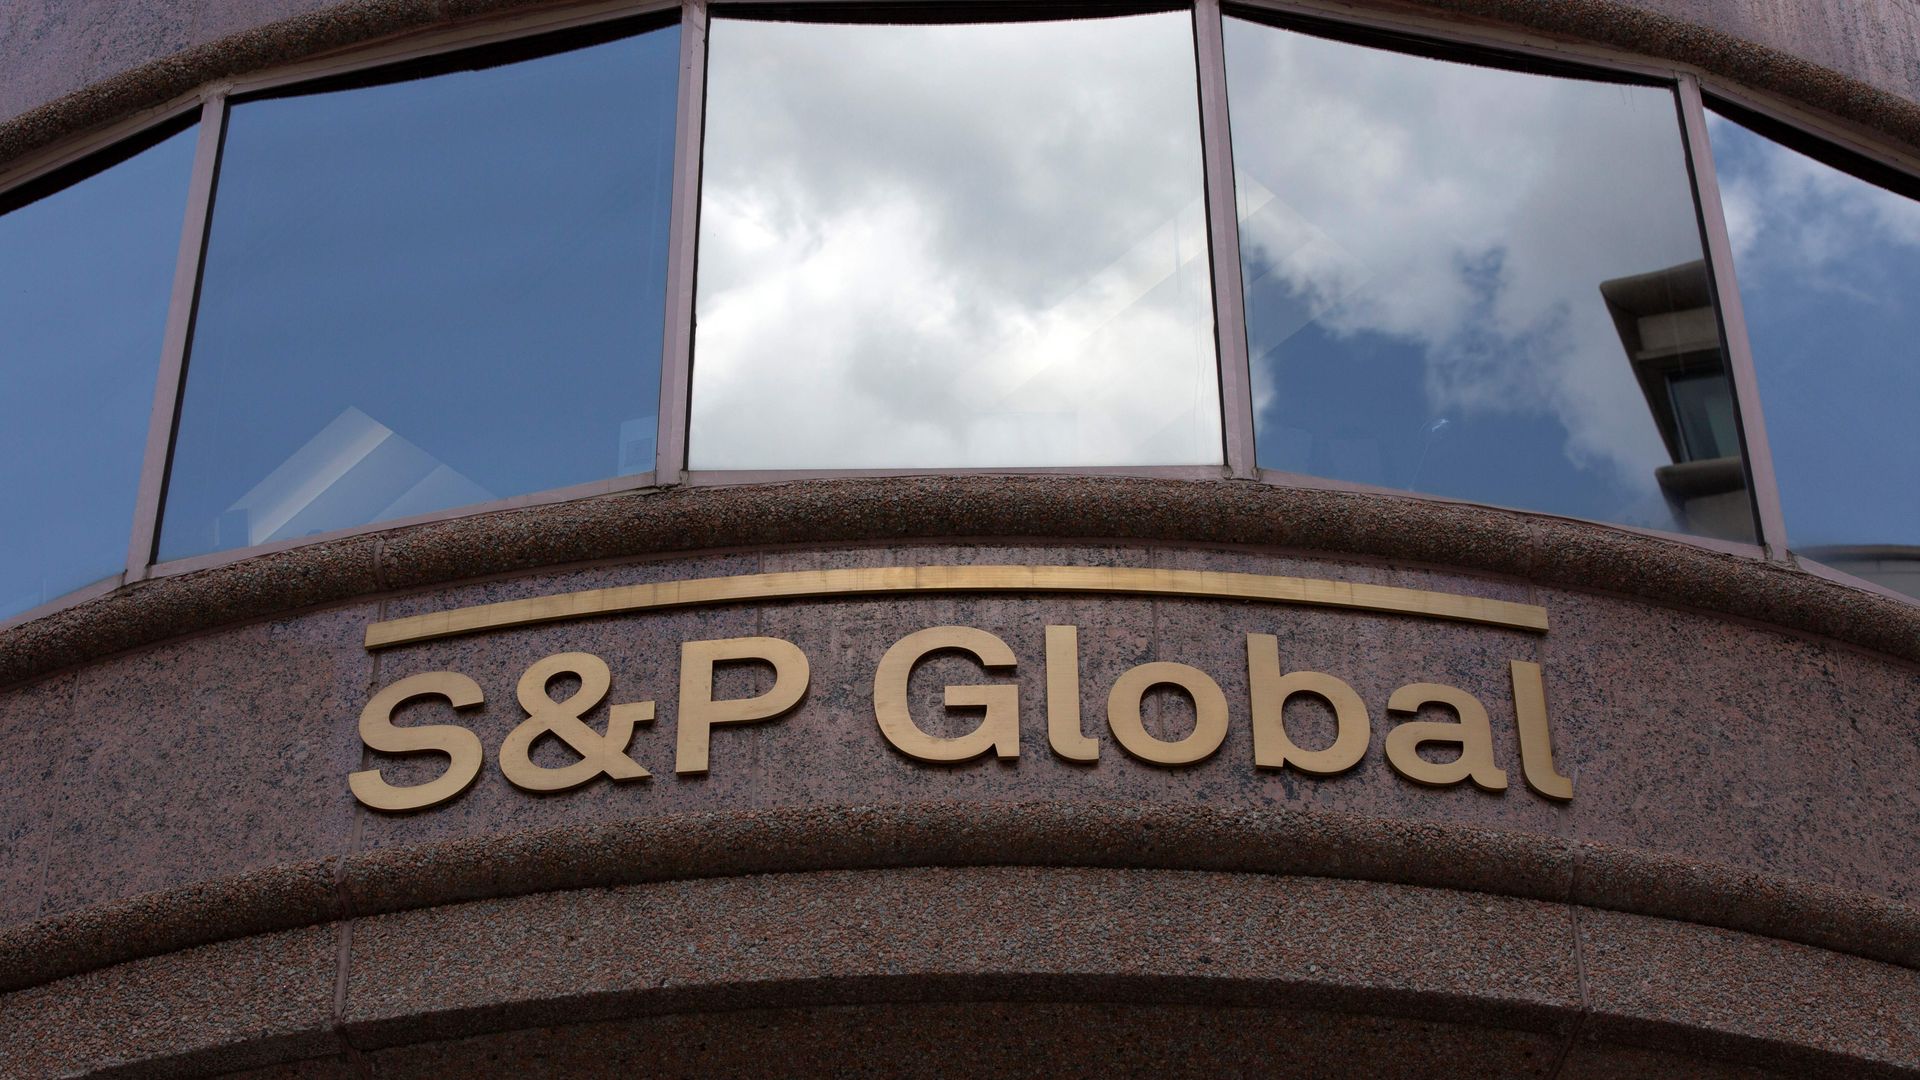 The S&P Global logo.